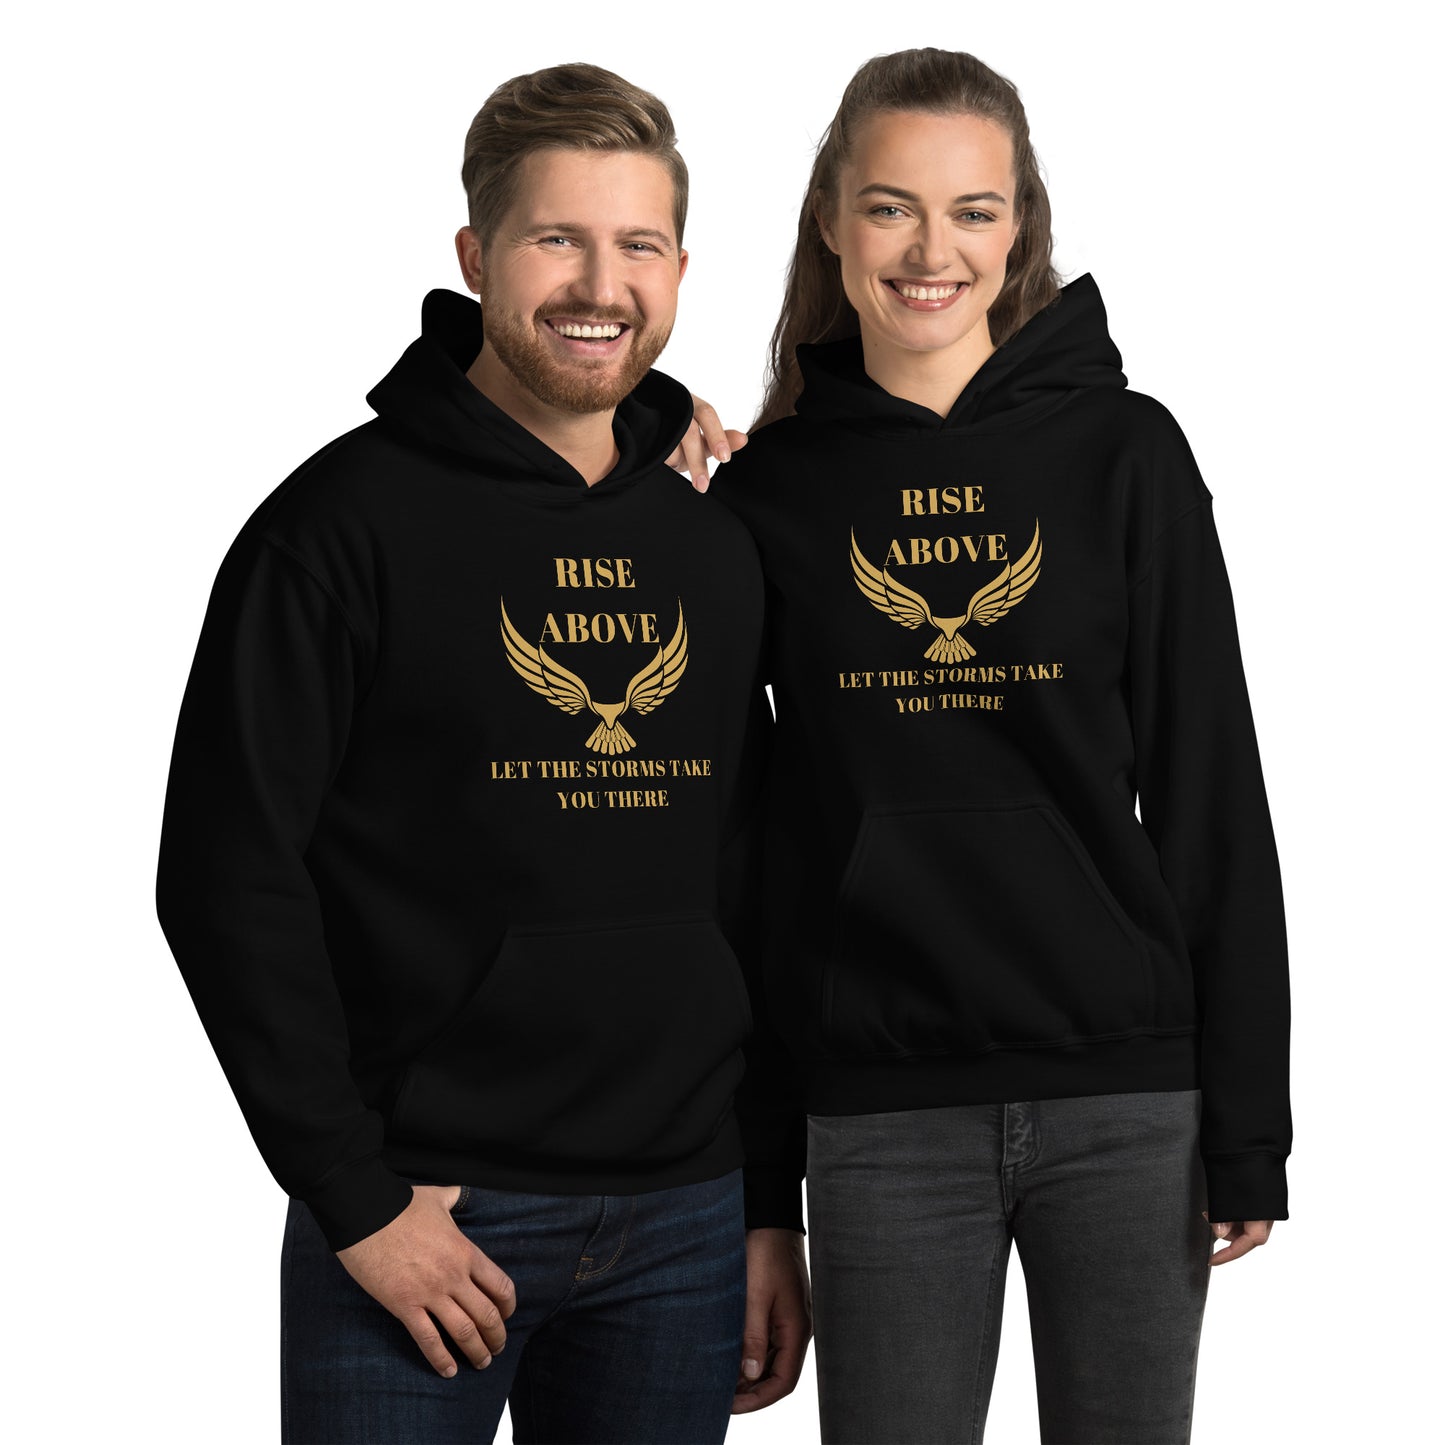 RISE ABOVE LET THE STORMS TAKE YOU THERE Unisex Hoodie